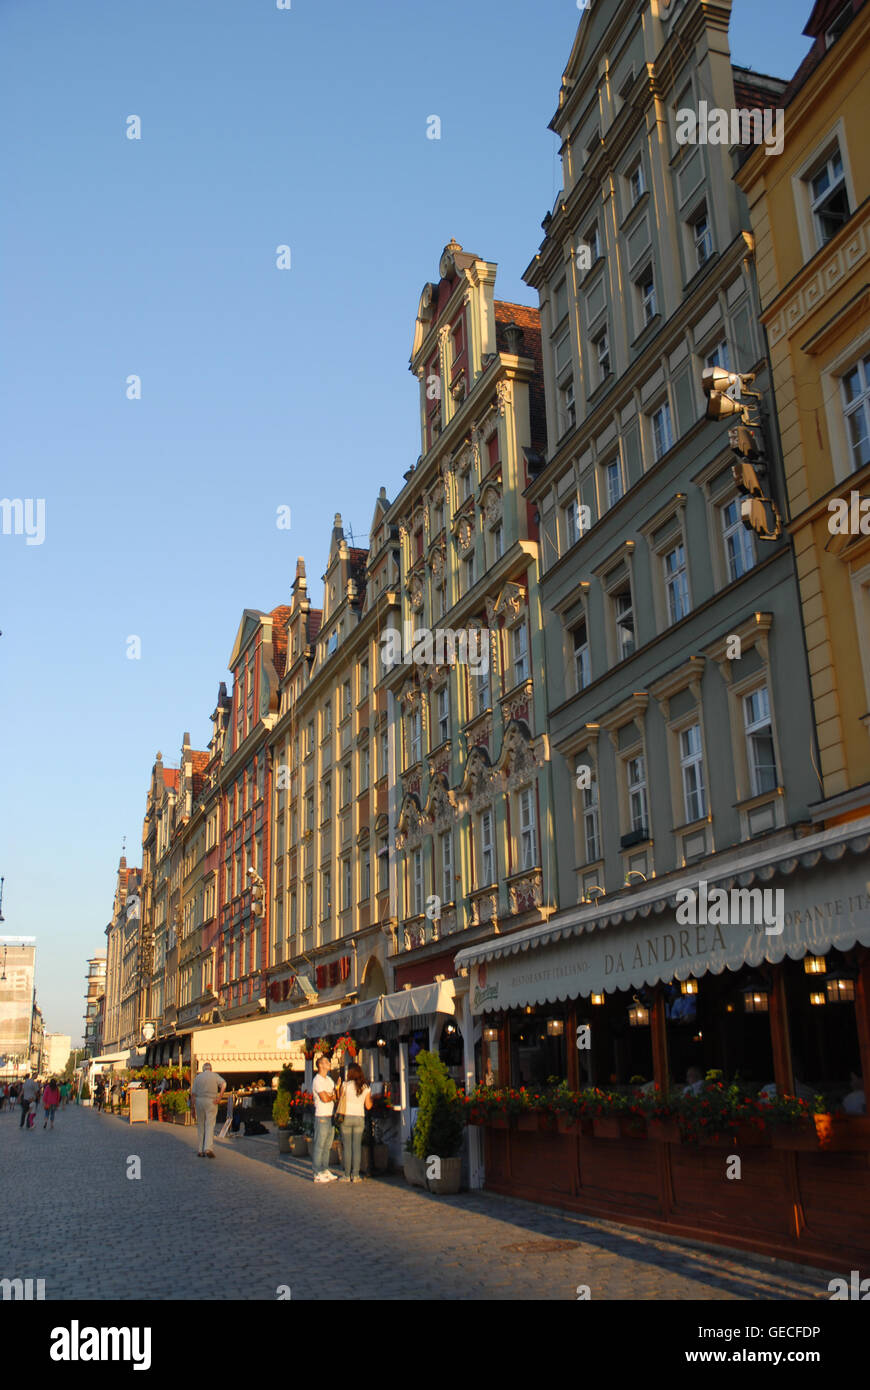 Late summer evening in The Market Square (Rynek), pedestrianised area in the centre of Wroclaw, Silesia, Poland Stock Photo